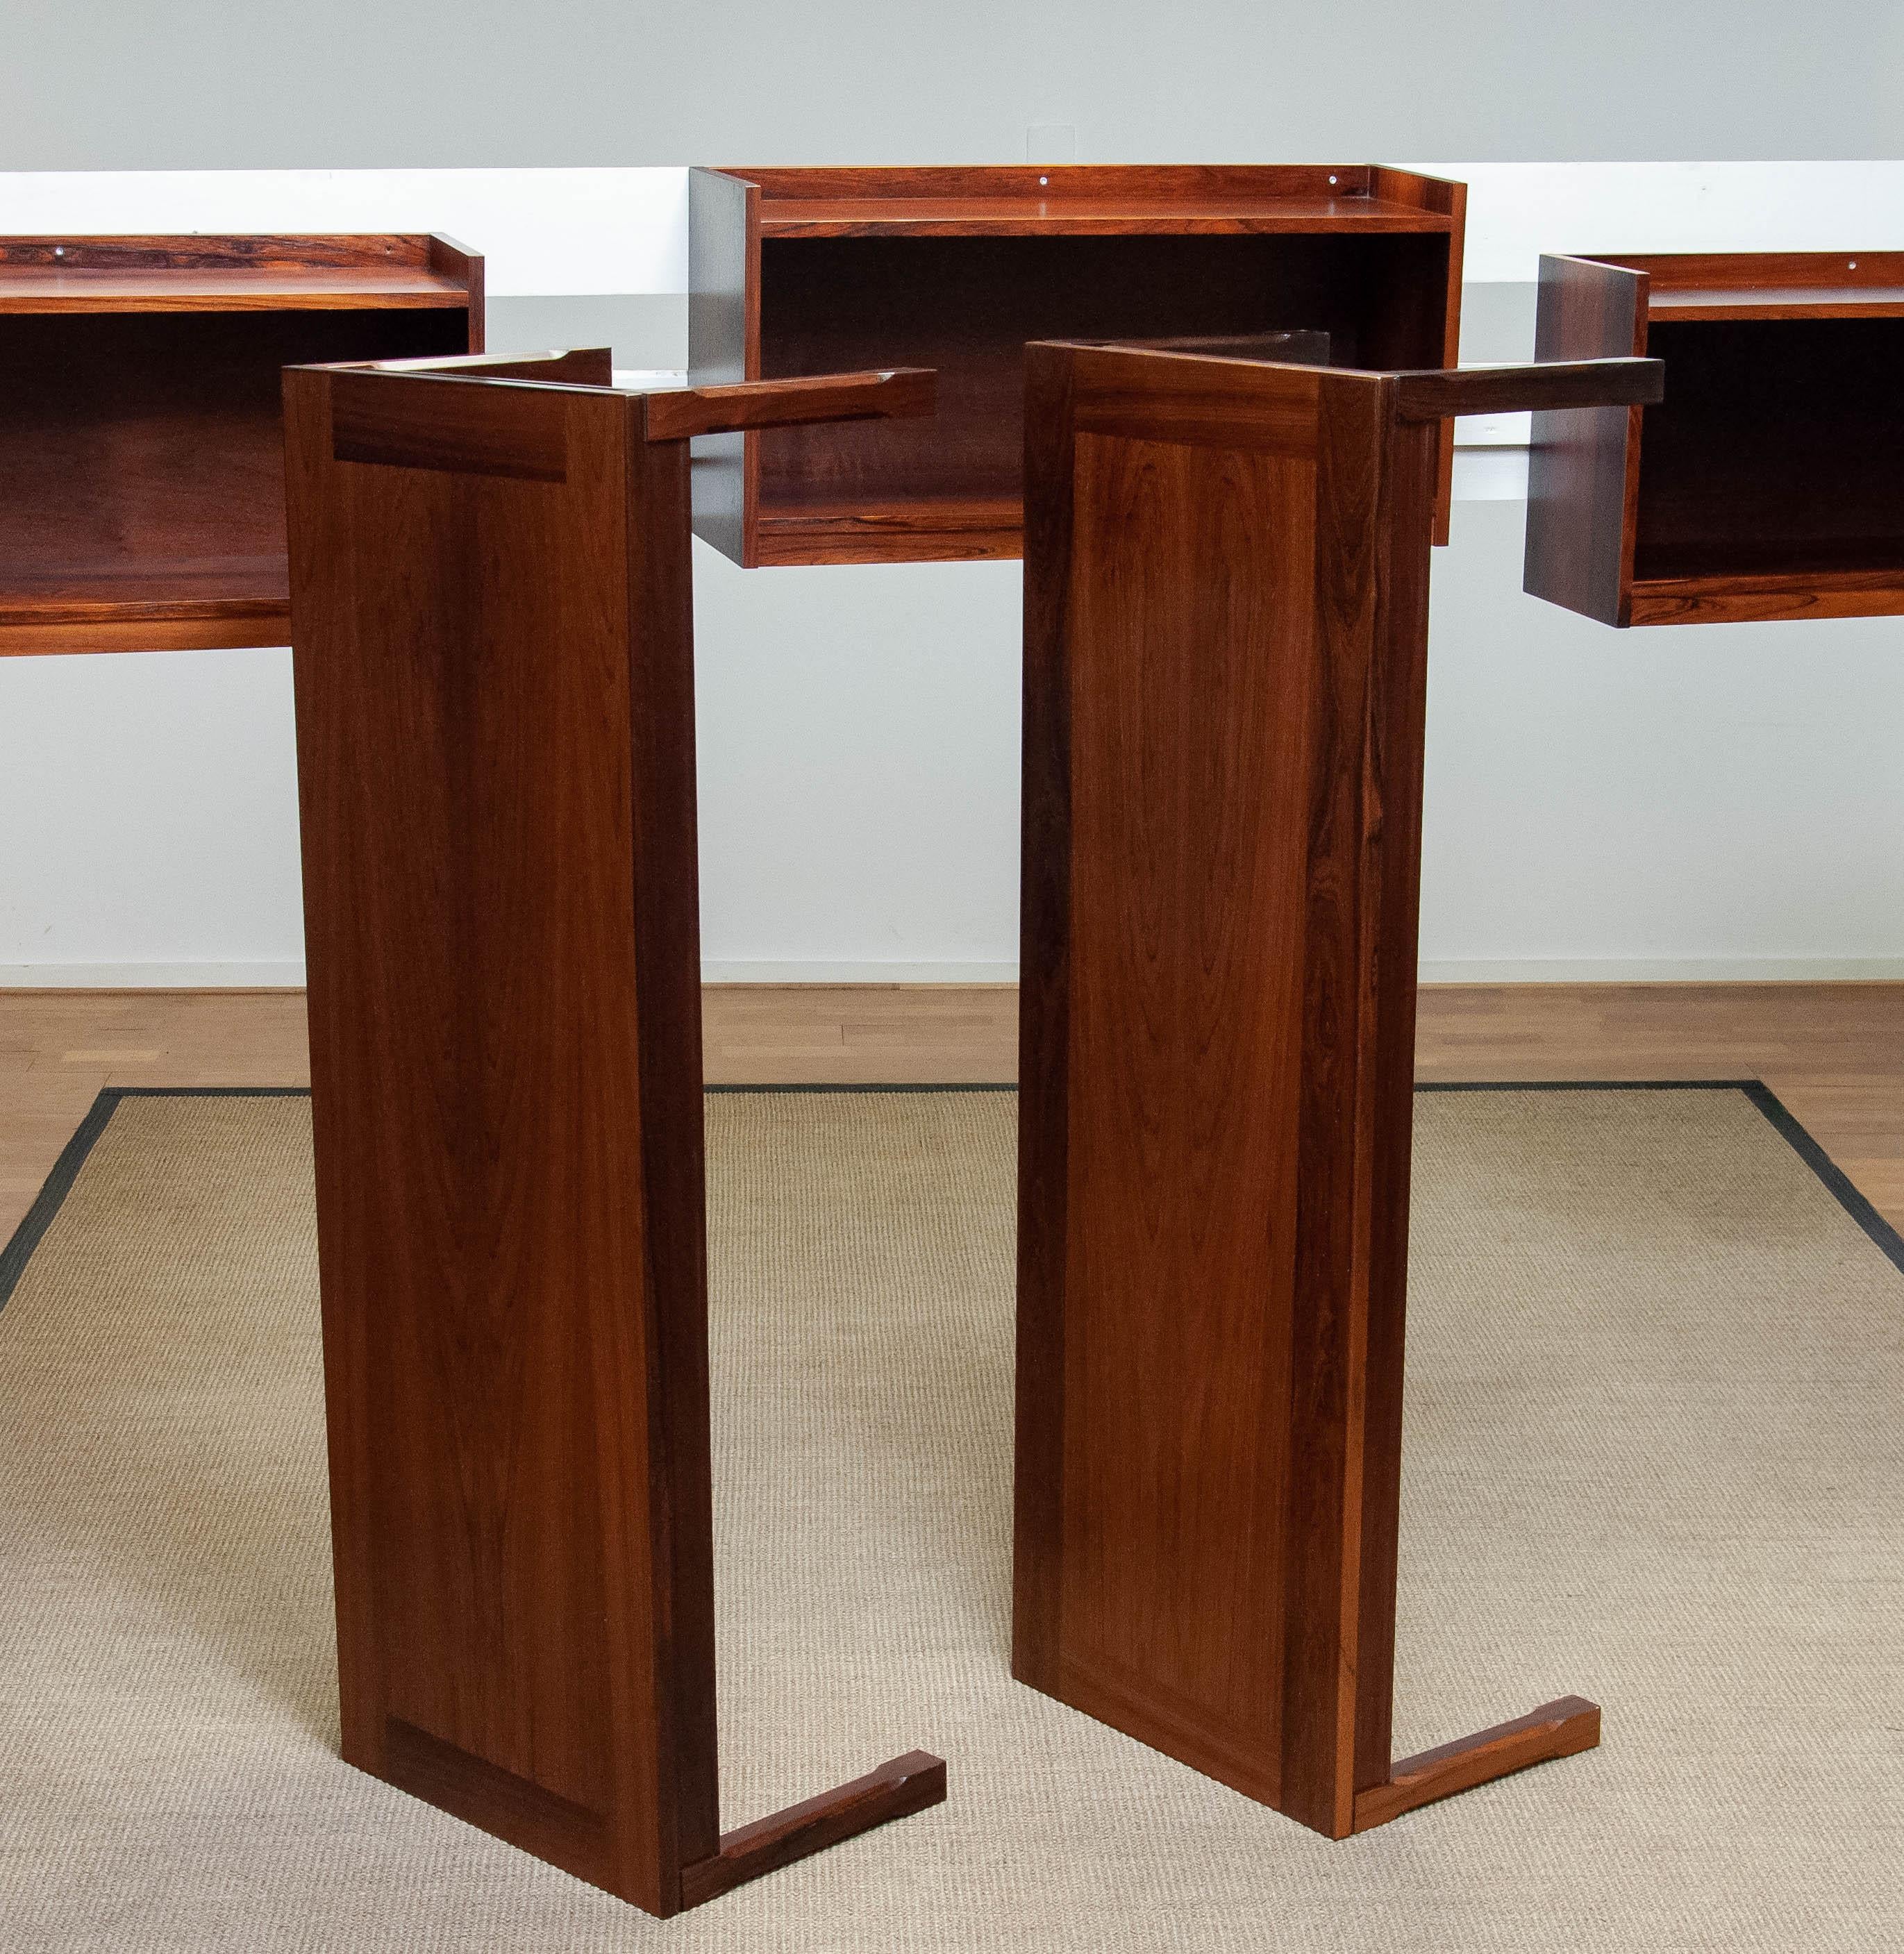 60s Hovering Rosewood Wall Mounted Cabinets Shelfs With Two Matching Side Tables For Sale 1